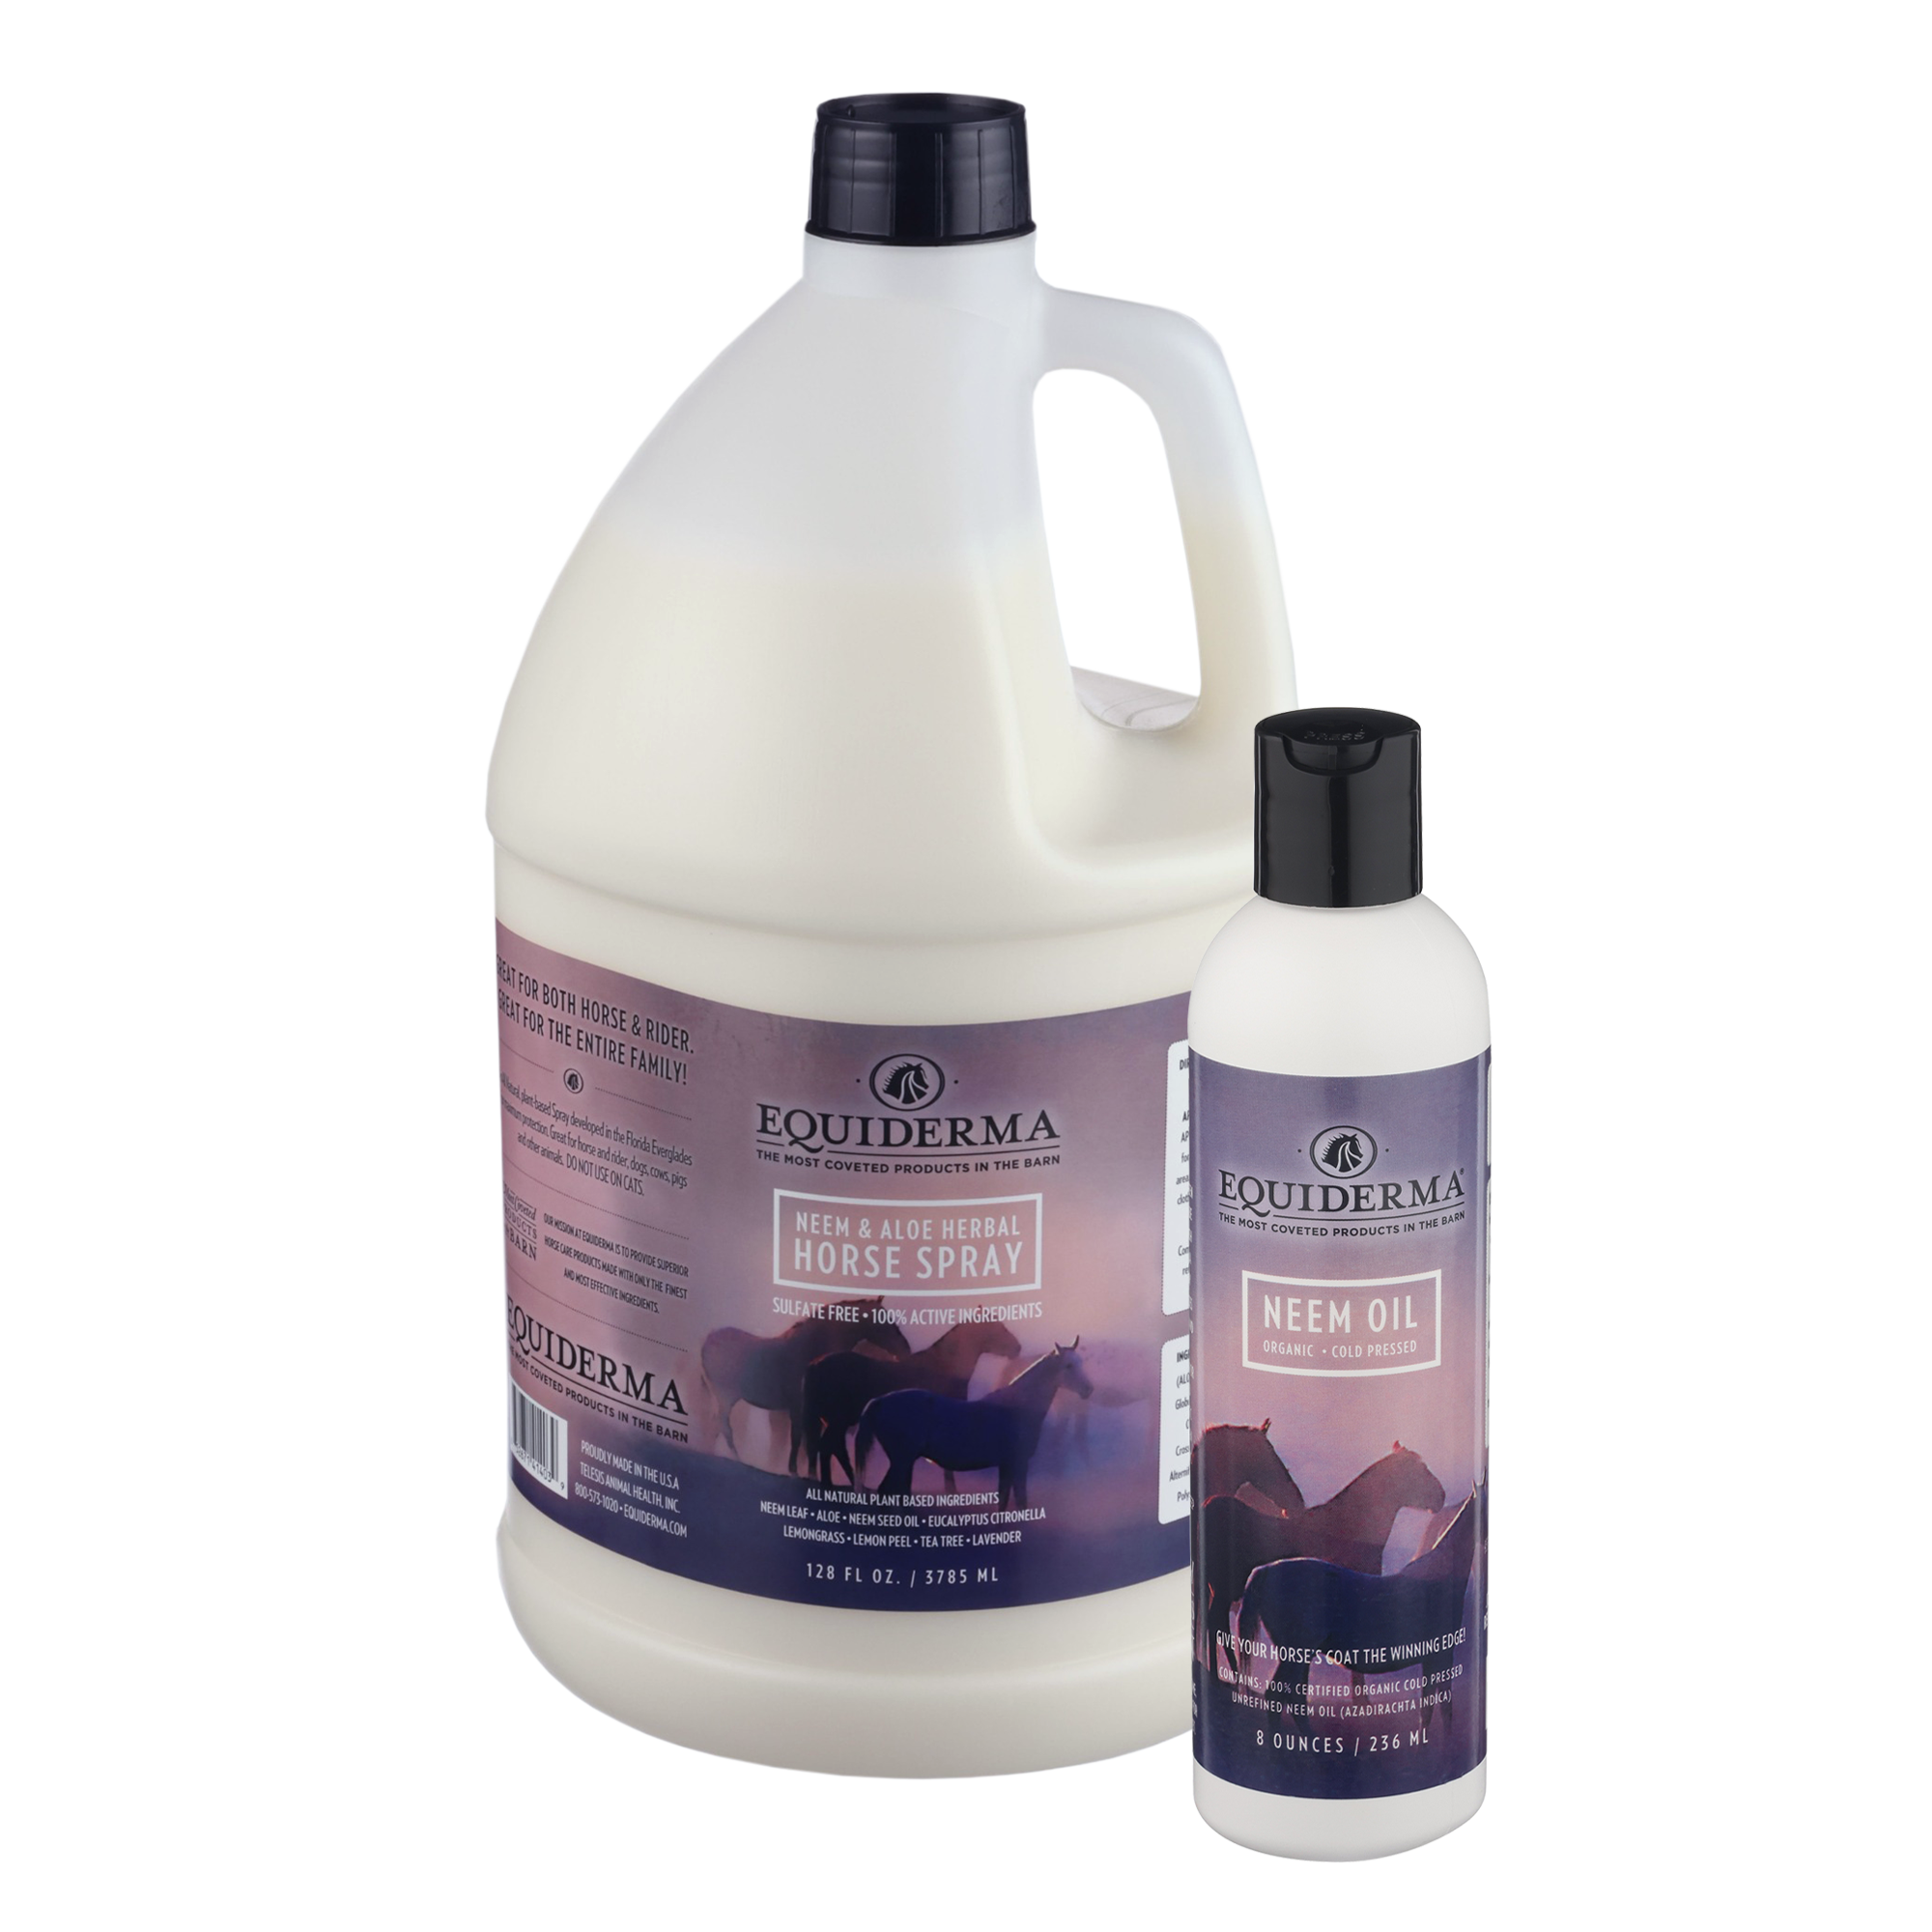 SALE! Buy a Gallon of Horse Spray, Get a Bottle of Neem Oil Free